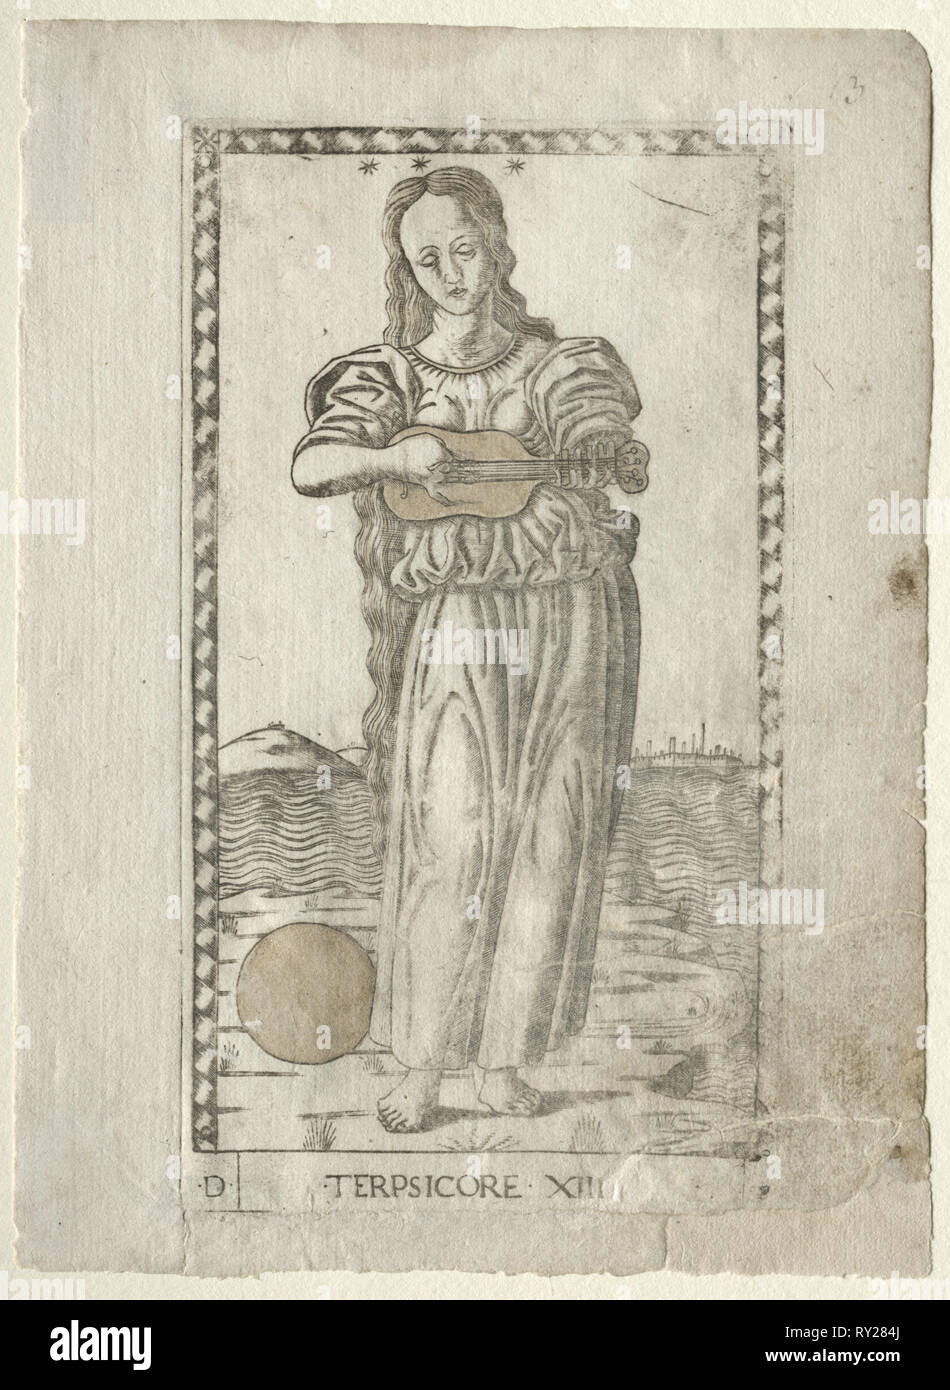 Terpsichore  (dancing and song) (from the Tarocchi series D:  Apollo and the Muses, #13), before 1467. Master of the E-Series Tarocchi (Italian, 15th century). Engraving Stock Photo